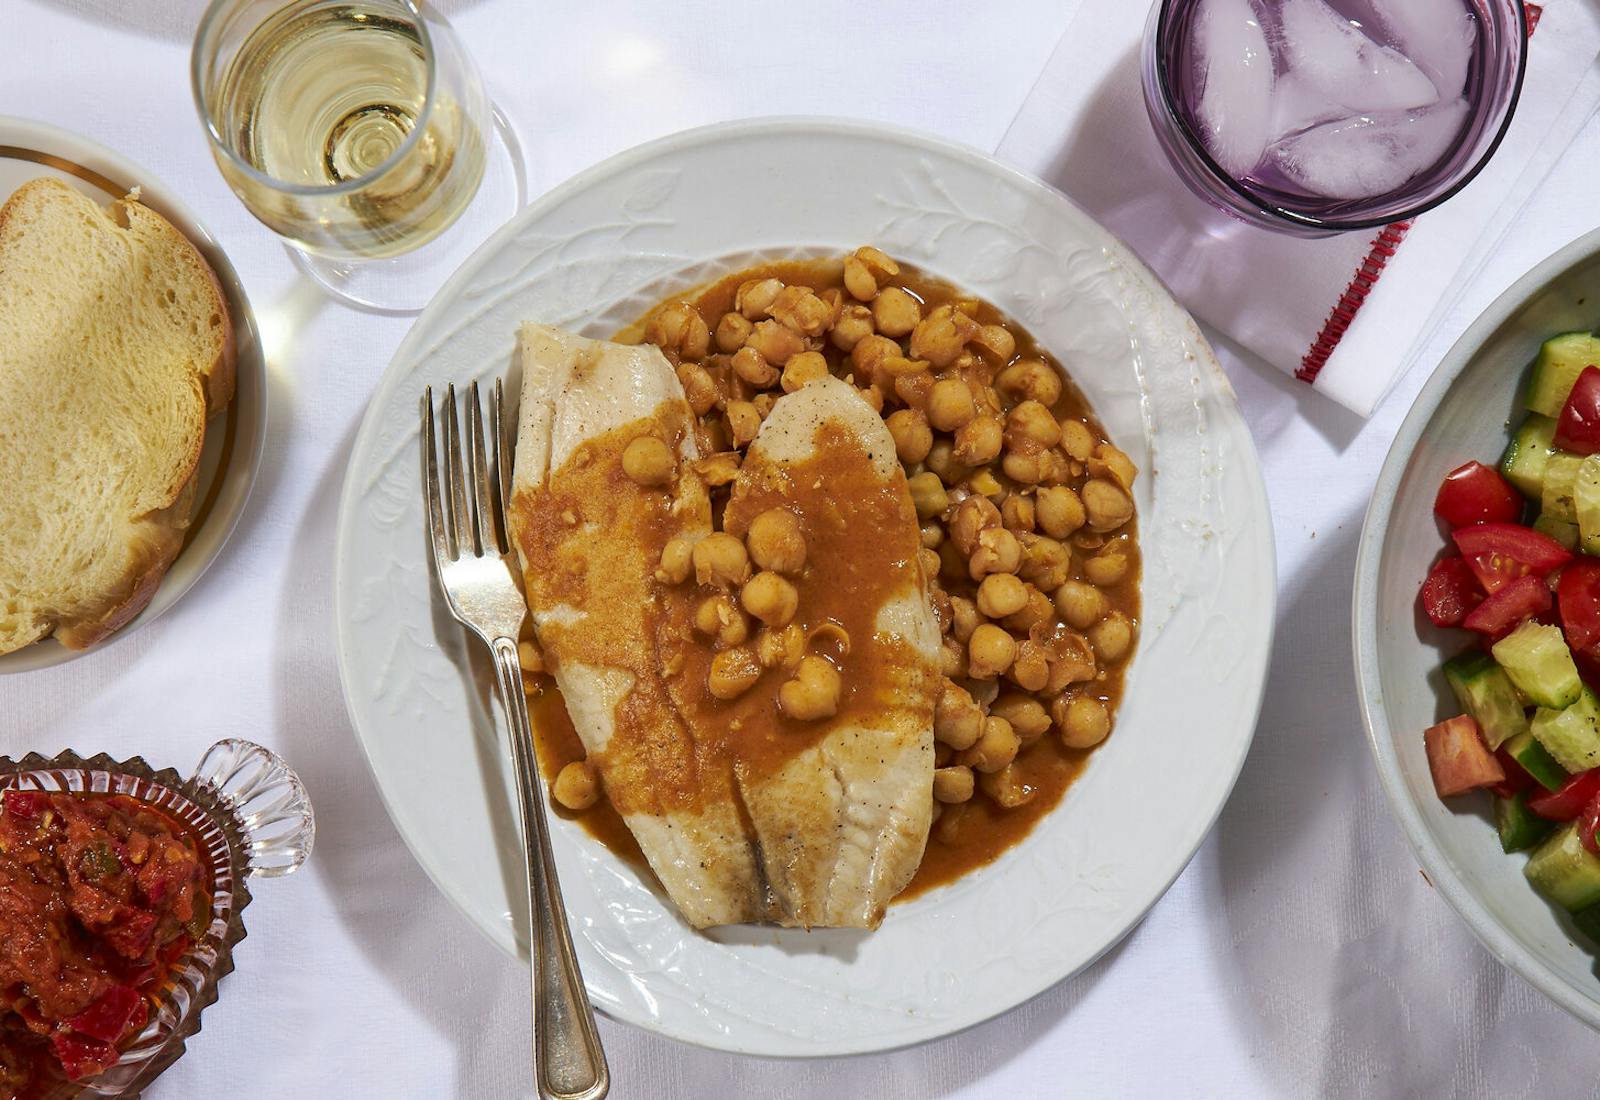 Chickpea stew with fish, slice of challah, white wine, matbucha and chopped salad atop white tablecloth.